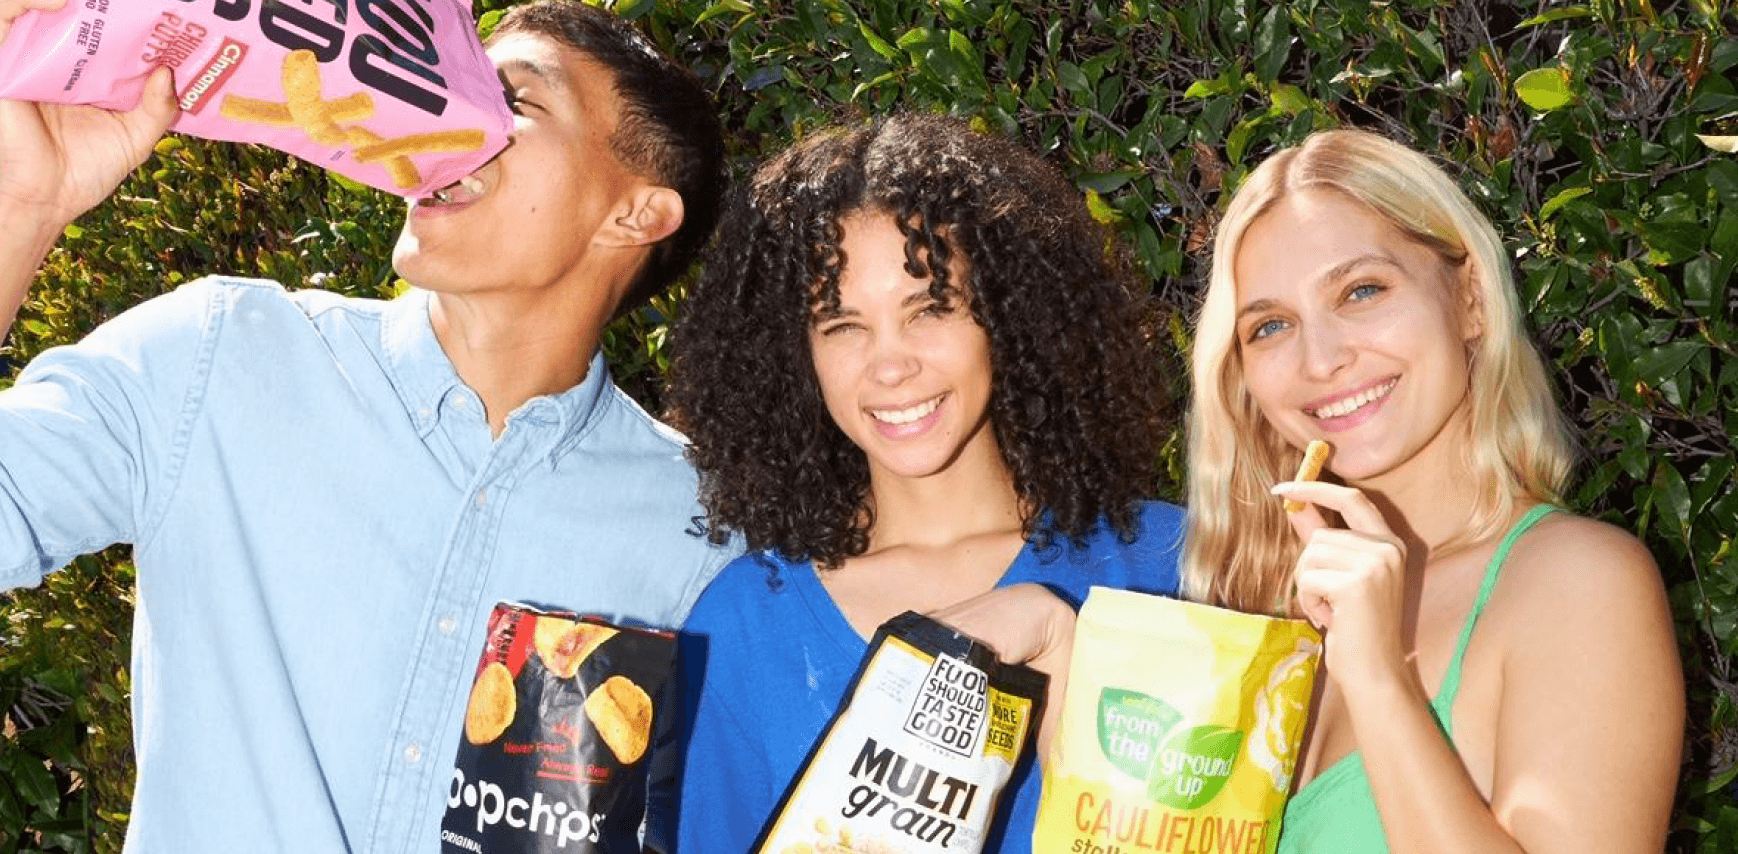 Three people holding various bags of chips and smiling at the camera.